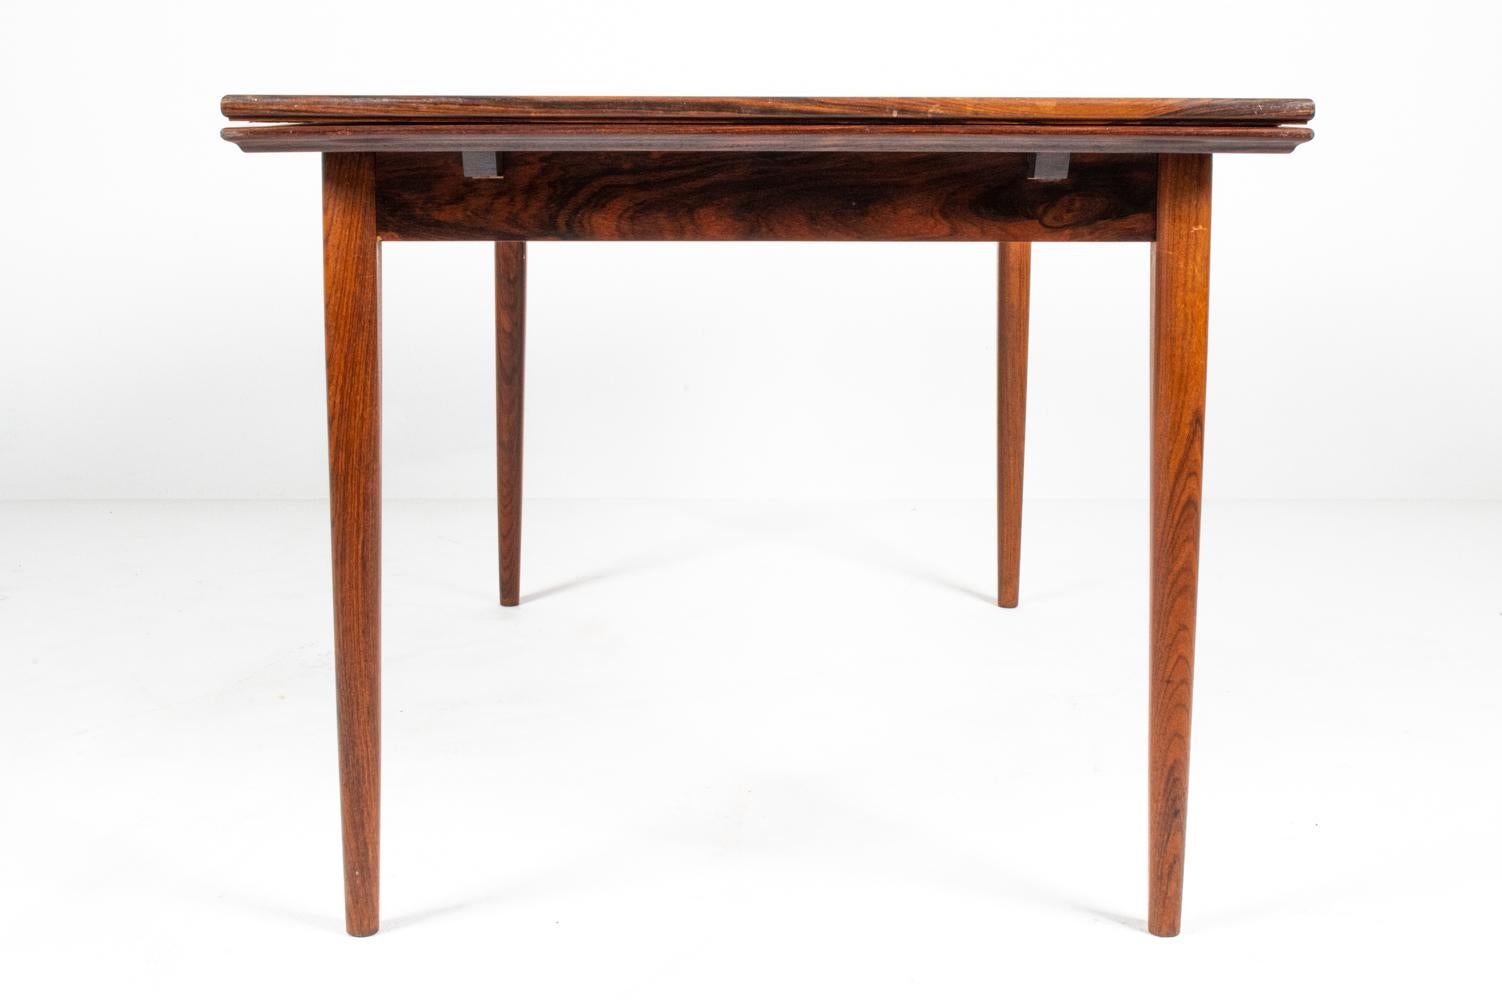 Danish Mid-Century Rosewood Extension Dining Table, c. 1960's For Sale 2